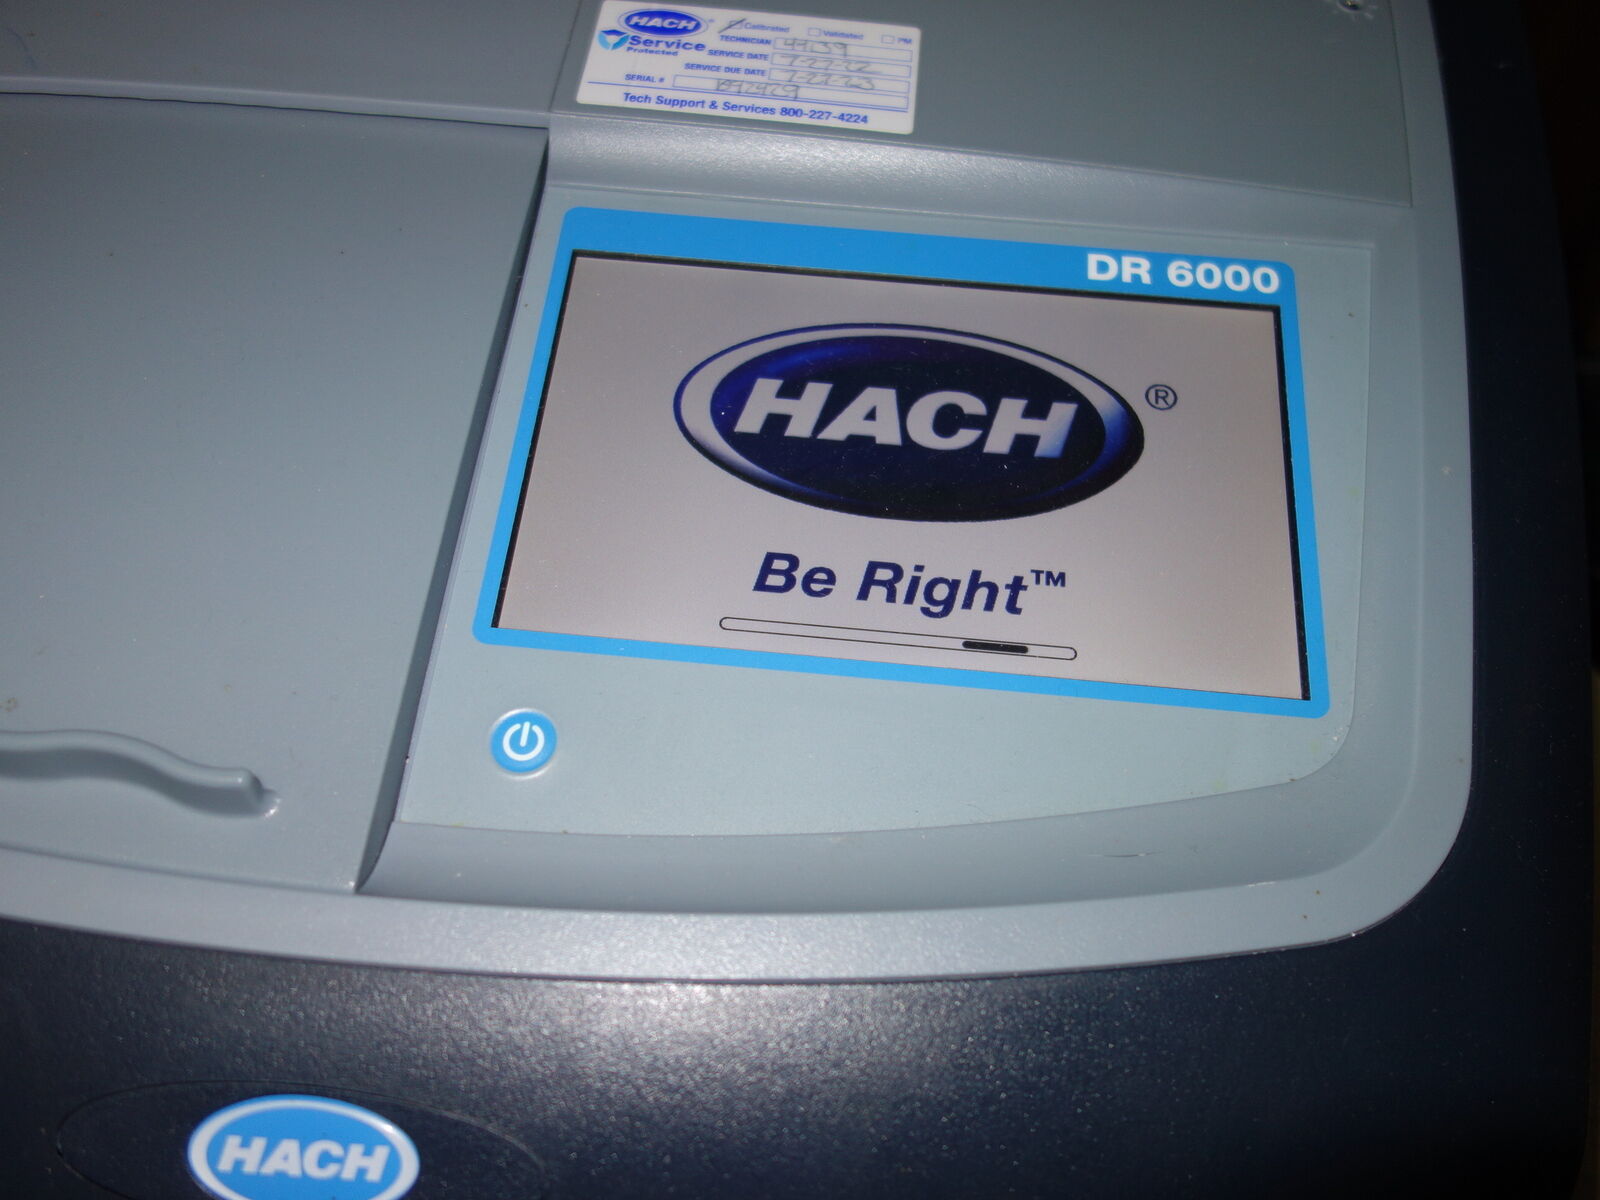 Hach DR6000 UV/VIS Spectrophotometer with RFID Technology LPG441.99.00012